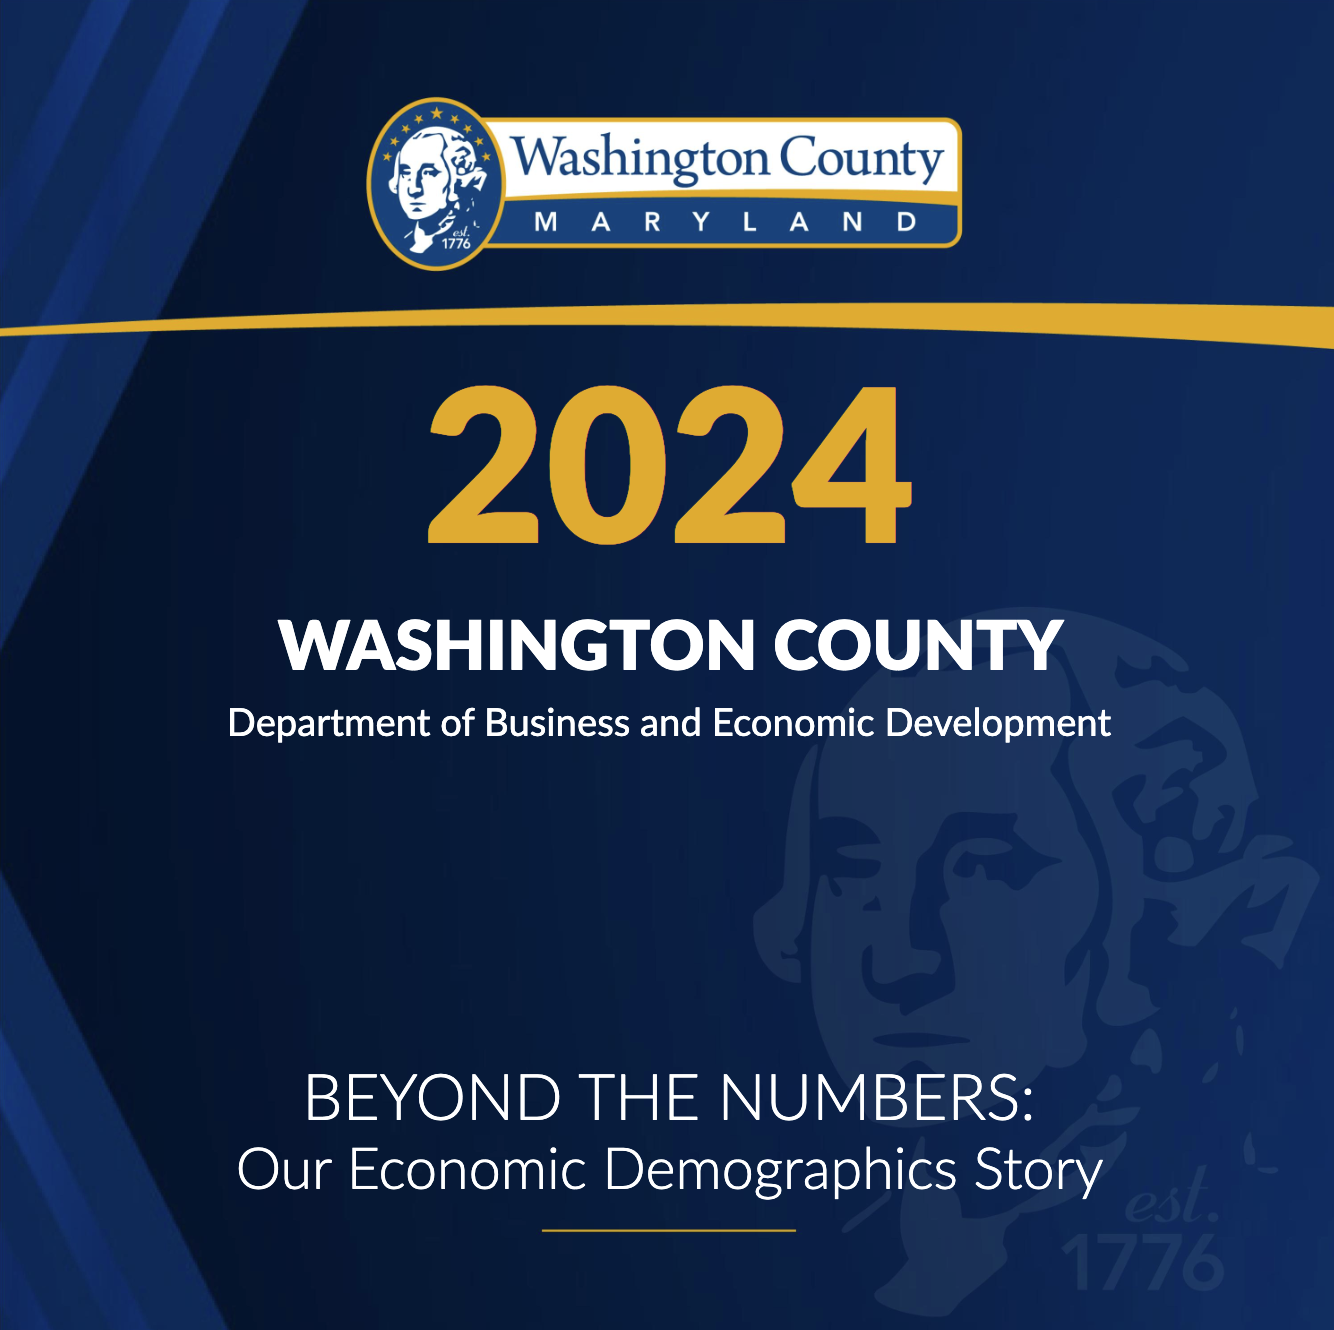 New Publication by Washington County Department of Business and Economic Development: “Beyond The Numbers: Exploring Our Economic Demographics”